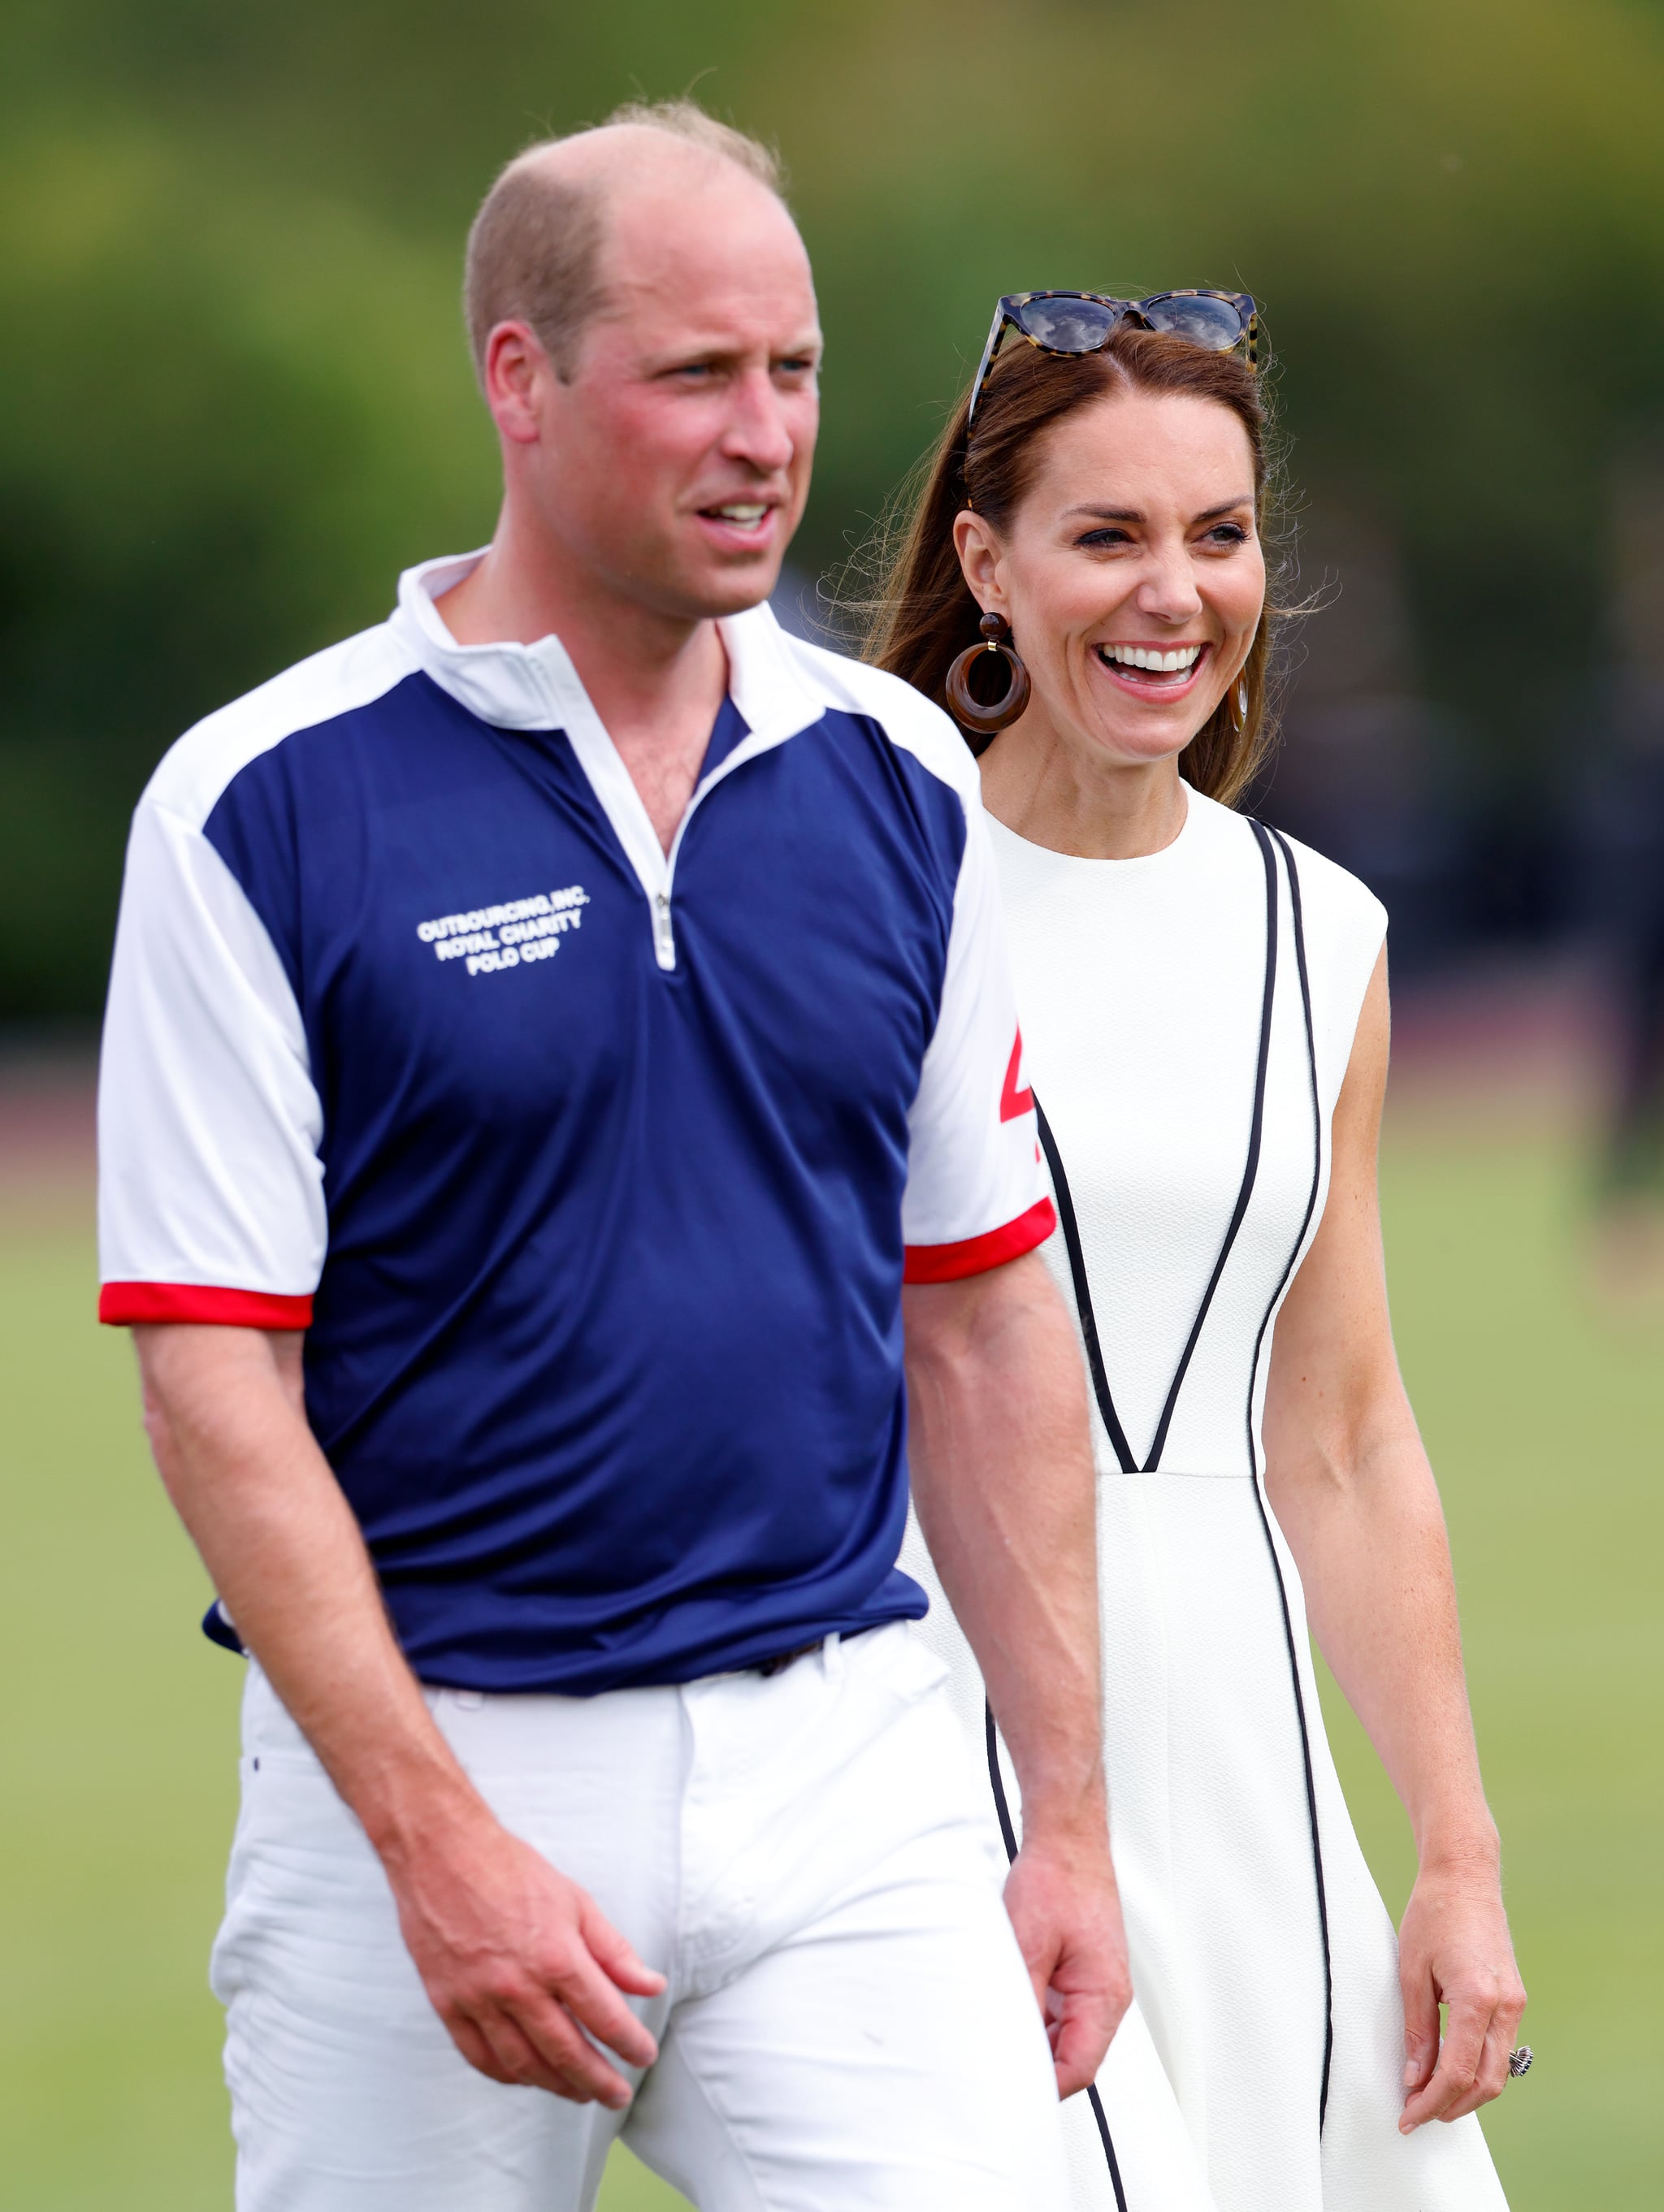 WINDSOR, UNITED KINGDOM - JULY 06: (EMBARGOED FOR PUBLICATION IN UK NEWSPAPERS UNTIL 24 HOURS AFTER CREATE DATE AND TIME) Prince William, Duke of Cambridge and Catherine, Duchess of Cambridge attend the Out-Sourcing Inc. Royal Charity Polo Cup at Guards Polo Club, Flemish Farm on July 6, 2022 in Windsor, England. (Photo by Max Mumby/Indigo/Getty Images)